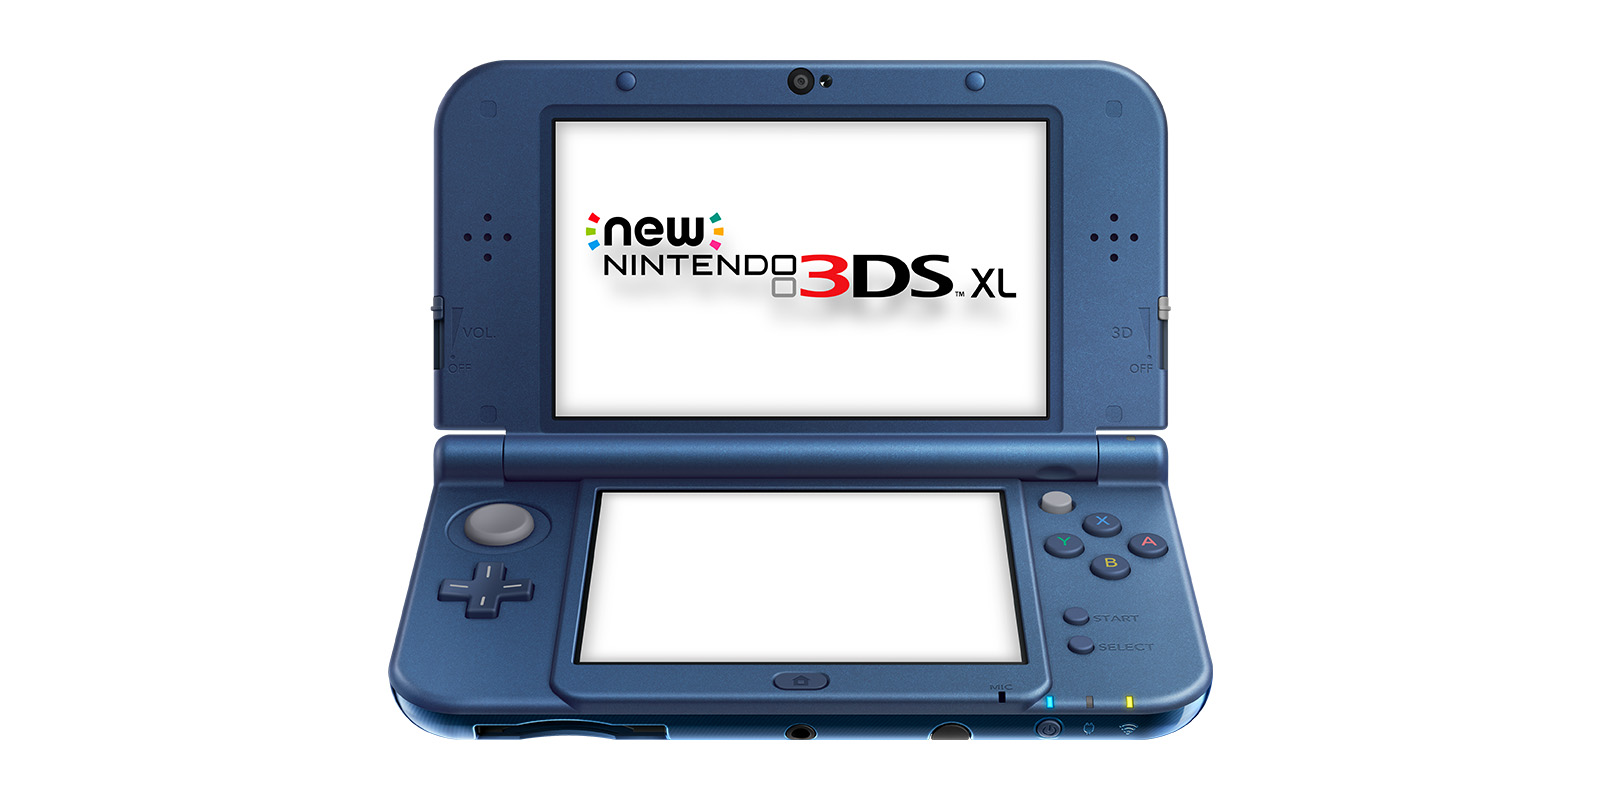 NERD Teams Up With Hardware Experts in Japan to Deliver 'Super-Stable 3d' on the New Nintendo 3DS